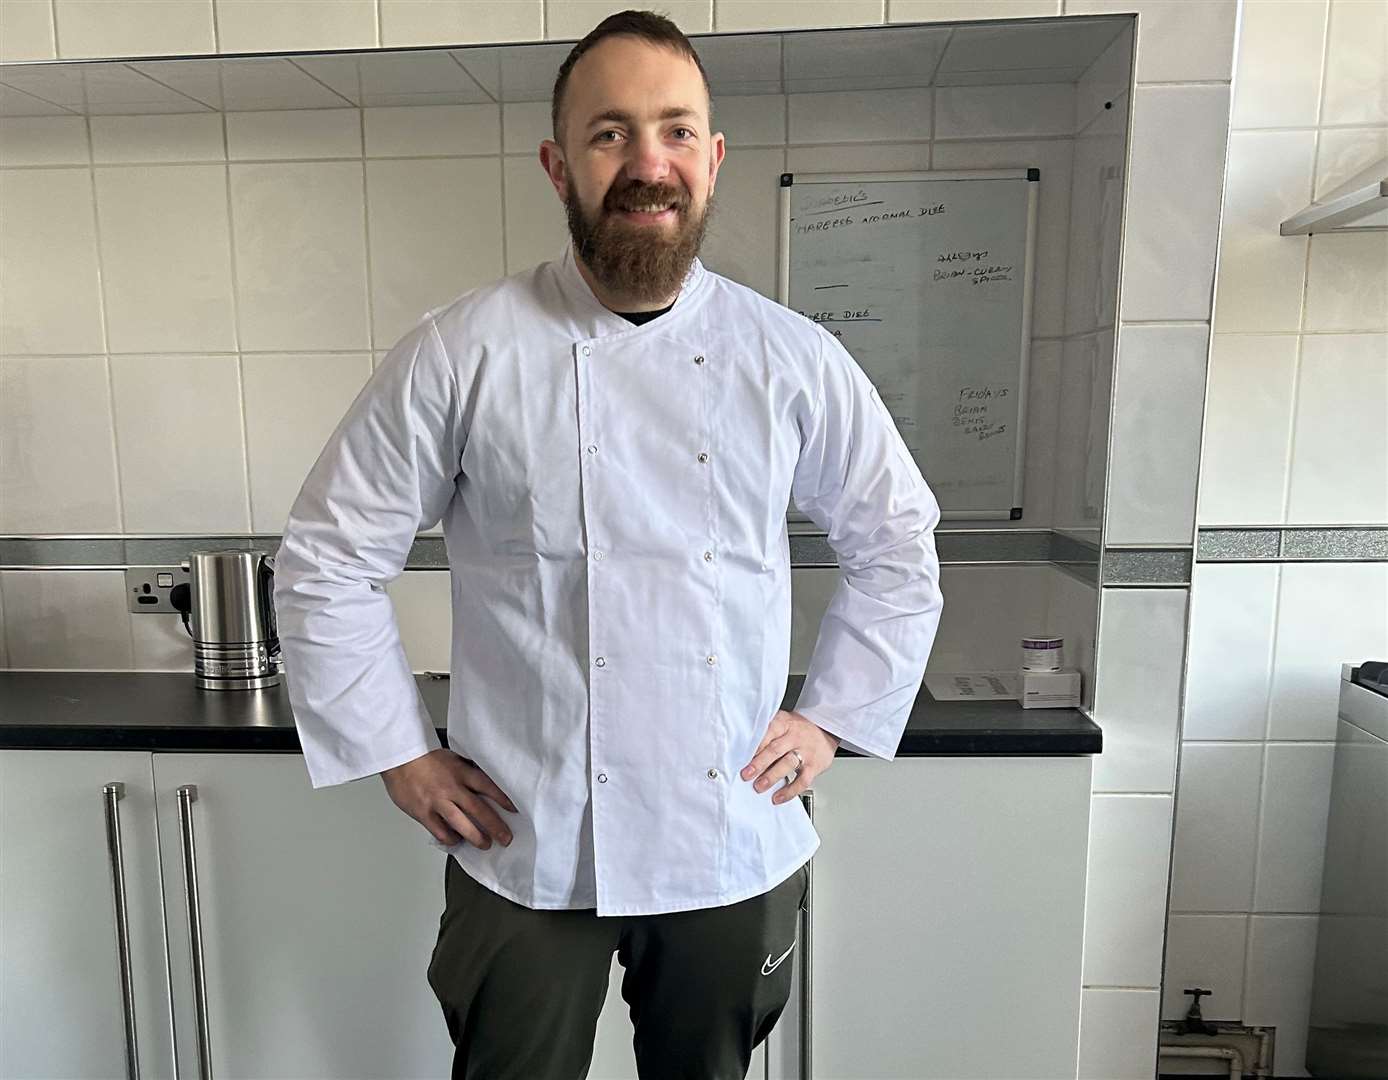 Chef Wojciech Zajdek is raring to go in his newly-kitted out kitchen